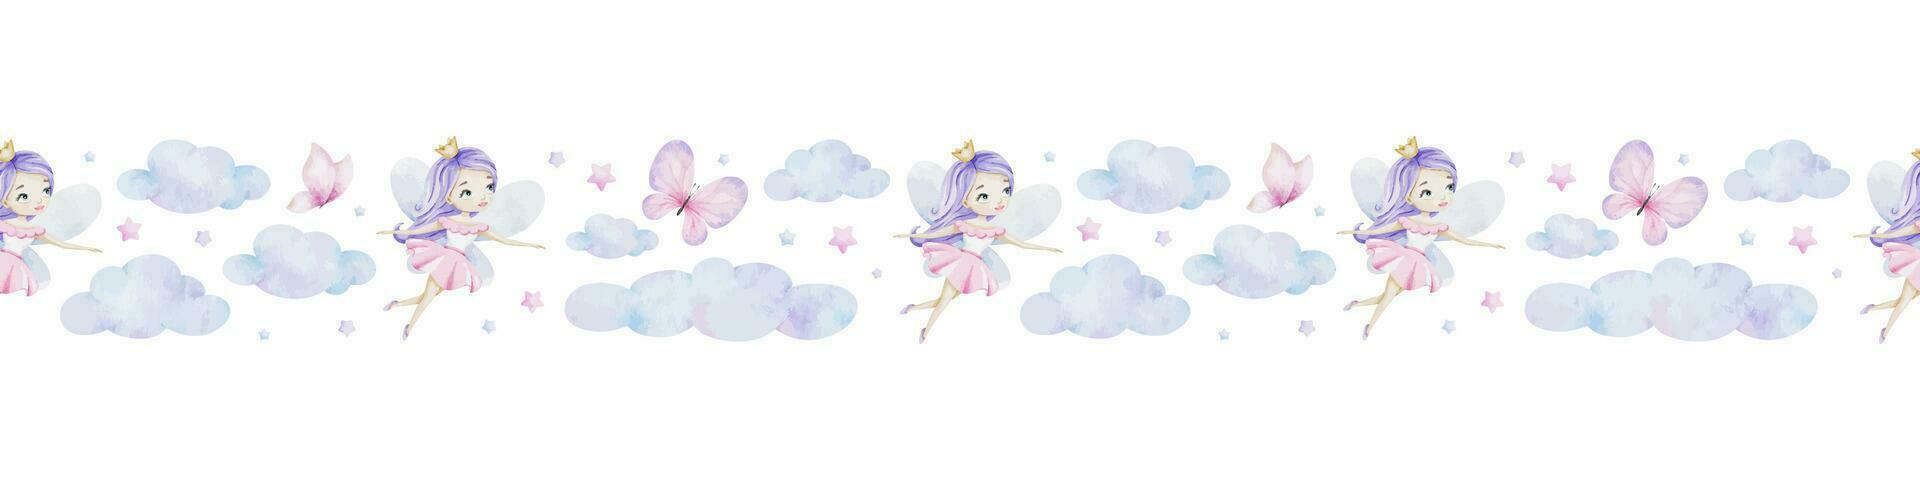 Cute little fairy with magic wand, stars, clouds and butterflies. Watercolor seamless border for children's goods, clothes, postcards, baby shower and nursery, fabric vector